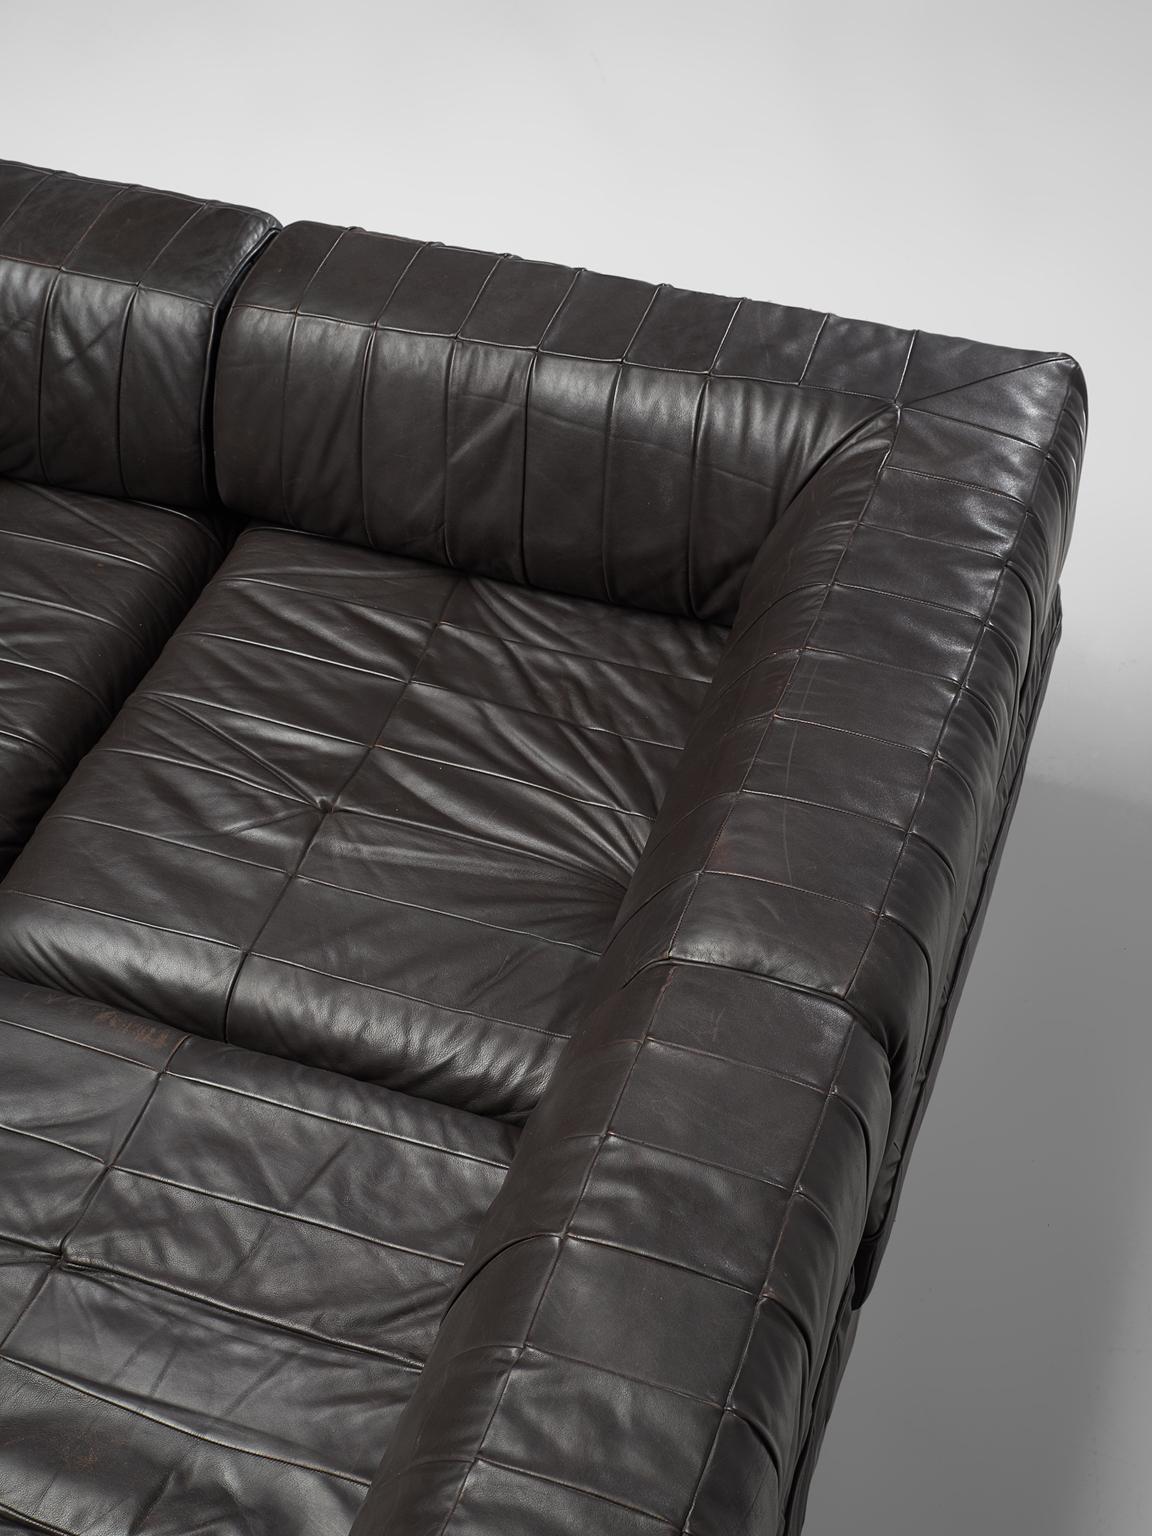 De Sede 'DS88' Sectional Sofa in Dark Brown Leather 5